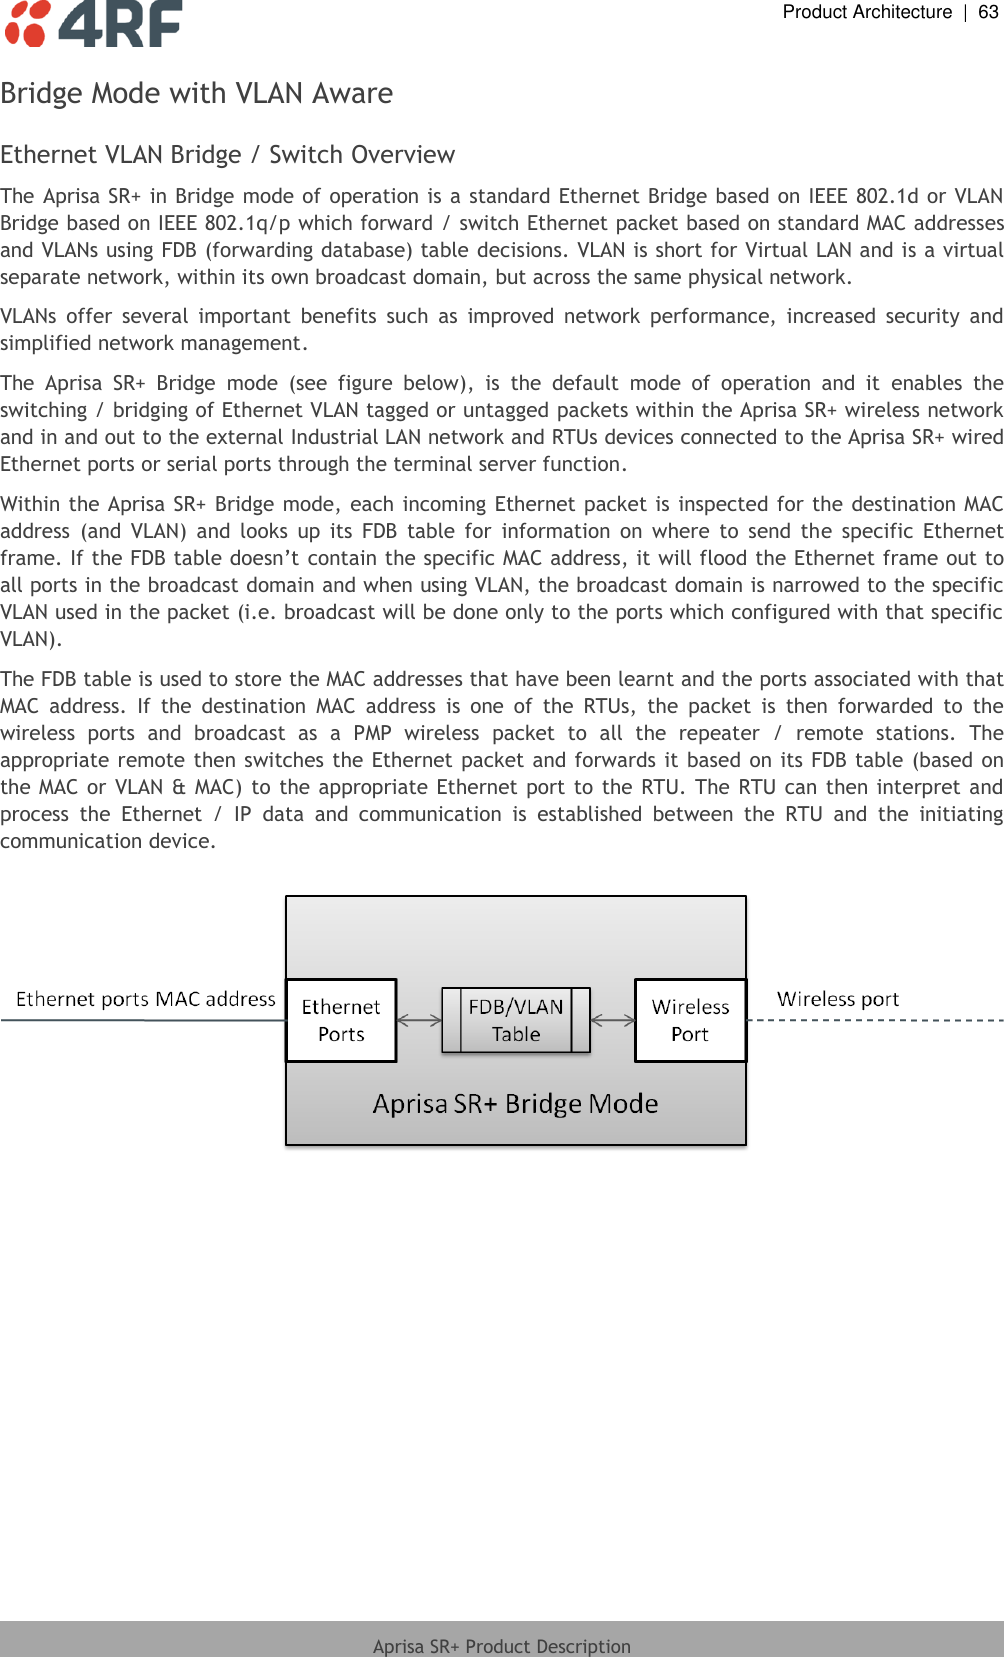  Product Architecture  |  63  Aprisa SR+ Product Description  Bridge Mode with VLAN Aware  Ethernet VLAN Bridge / Switch Overview The Aprisa SR+ in Bridge  mode of operation is a standard Ethernet Bridge based on IEEE 802.1d or VLAN Bridge based on IEEE 802.1q/p which forward / switch Ethernet packet based on standard MAC addresses and VLANs using FDB (forwarding database) table decisions. VLAN is short for Virtual LAN and is a virtual separate network, within its own broadcast domain, but across the same physical network. VLANs  offer  several  important  benefits  such  as  improved  network  performance,  increased  security  and simplified network management. The  Aprisa  SR+  Bridge  mode  (see  figure  below),  is  the  default  mode  of  operation  and  it  enables  the switching / bridging of Ethernet VLAN tagged or untagged packets within the Aprisa SR+ wireless network and in and out to the external Industrial LAN network and RTUs devices connected to the Aprisa SR+ wired Ethernet ports or serial ports through the terminal server function. Within the Aprisa SR+ Bridge mode, each incoming  Ethernet packet is inspected for the destination MAC address  (and  VLAN)  and  looks  up  its  FDB  table  for  information  on  where  to  send  the  specific  Ethernet frame. If the FDB table doesn’t contain the specific MAC address, it will flood the Ethernet frame out to all ports in the broadcast domain and when using VLAN, the broadcast domain is narrowed to the specific VLAN used in the packet (i.e. broadcast will be done only to the ports which configured with that specific VLAN). The FDB table is used to store the MAC addresses that have been learnt and the ports associated with that MAC  address.  If  the  destination  MAC  address  is  one  of  the  RTUs,  the  packet  is  then  forwarded  to  the wireless  ports  and  broadcast  as  a  PMP  wireless  packet  to  all  the  repeater  /  remote  stations.  The appropriate remote then switches the Ethernet packet and forwards it  based on its FDB table (based on the MAC or VLAN &amp; MAC)  to  the appropriate Ethernet port to the RTU. The RTU  can then interpret and process  the  Ethernet  /  IP  data  and  communication  is  established  between  the  RTU  and  the  initiating communication device.    